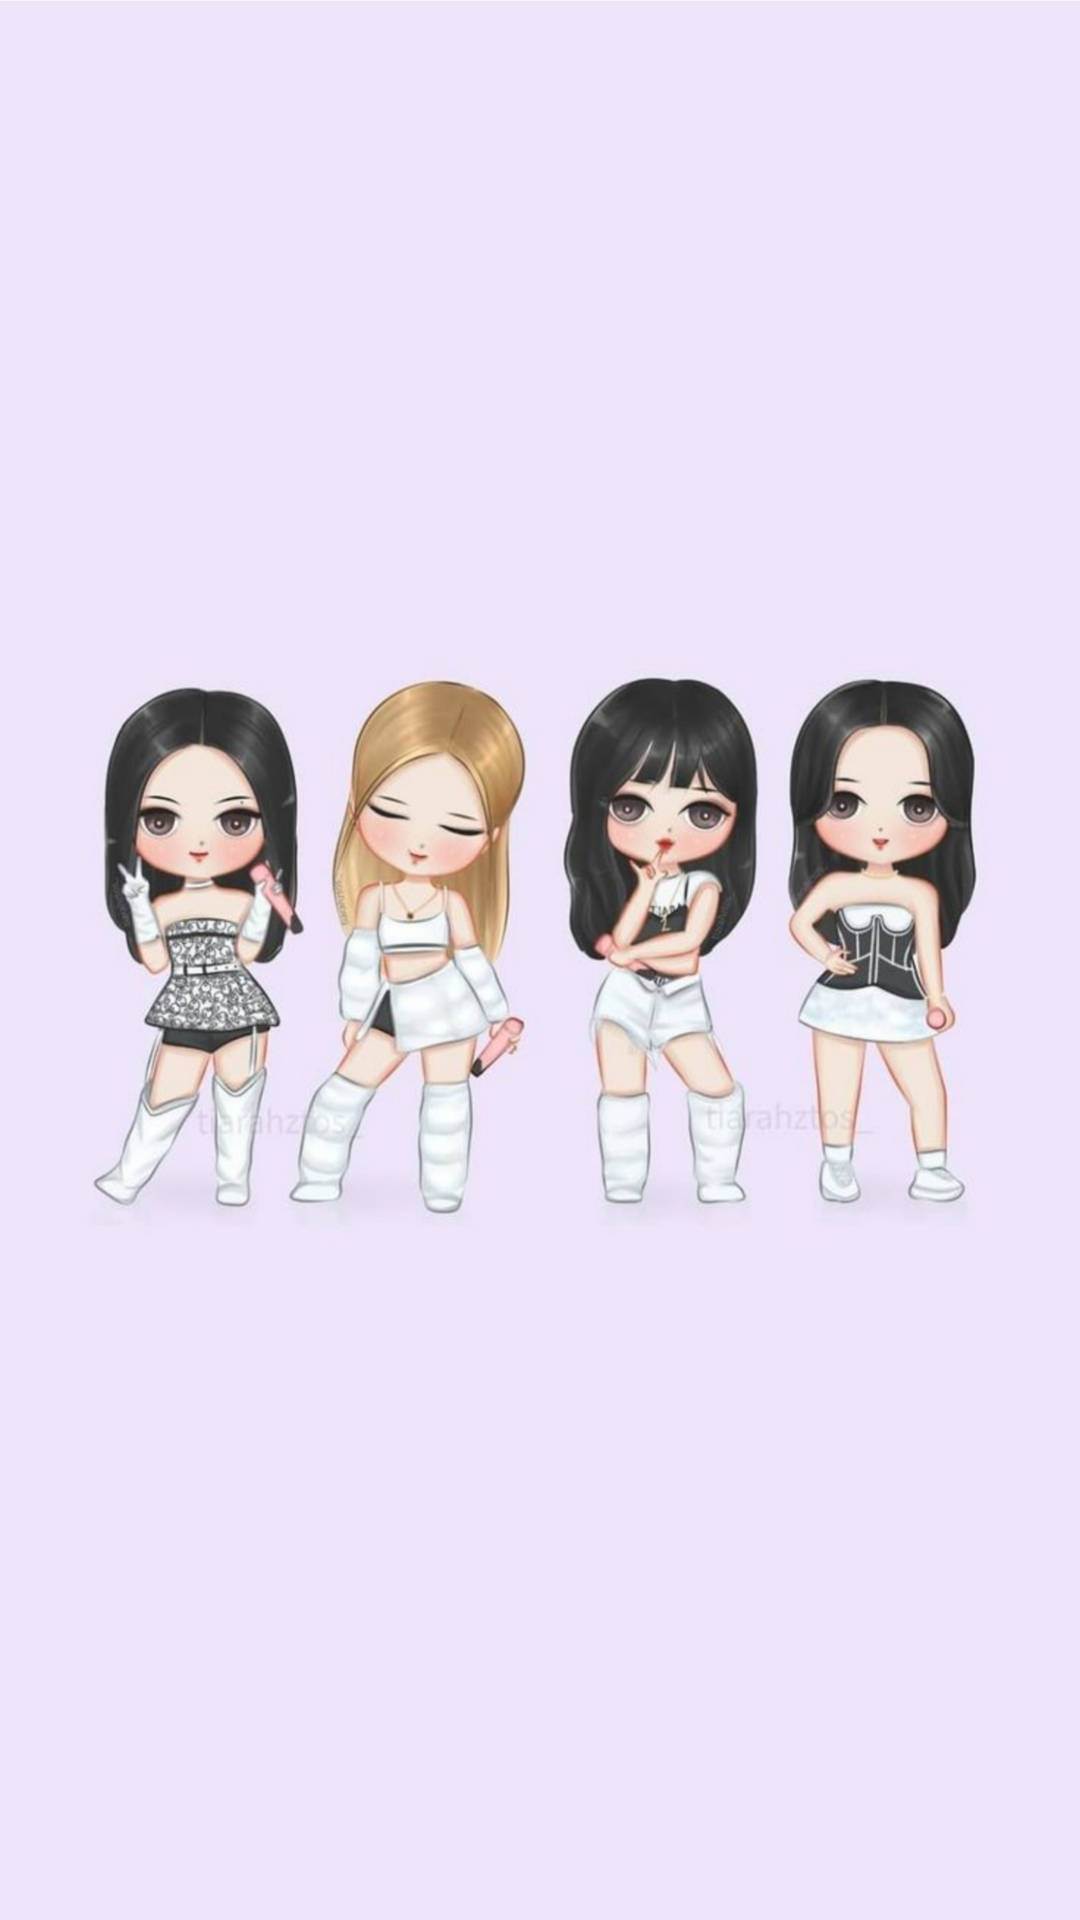 Download Blackpink Cartoon In White Clothes Wallpaper 